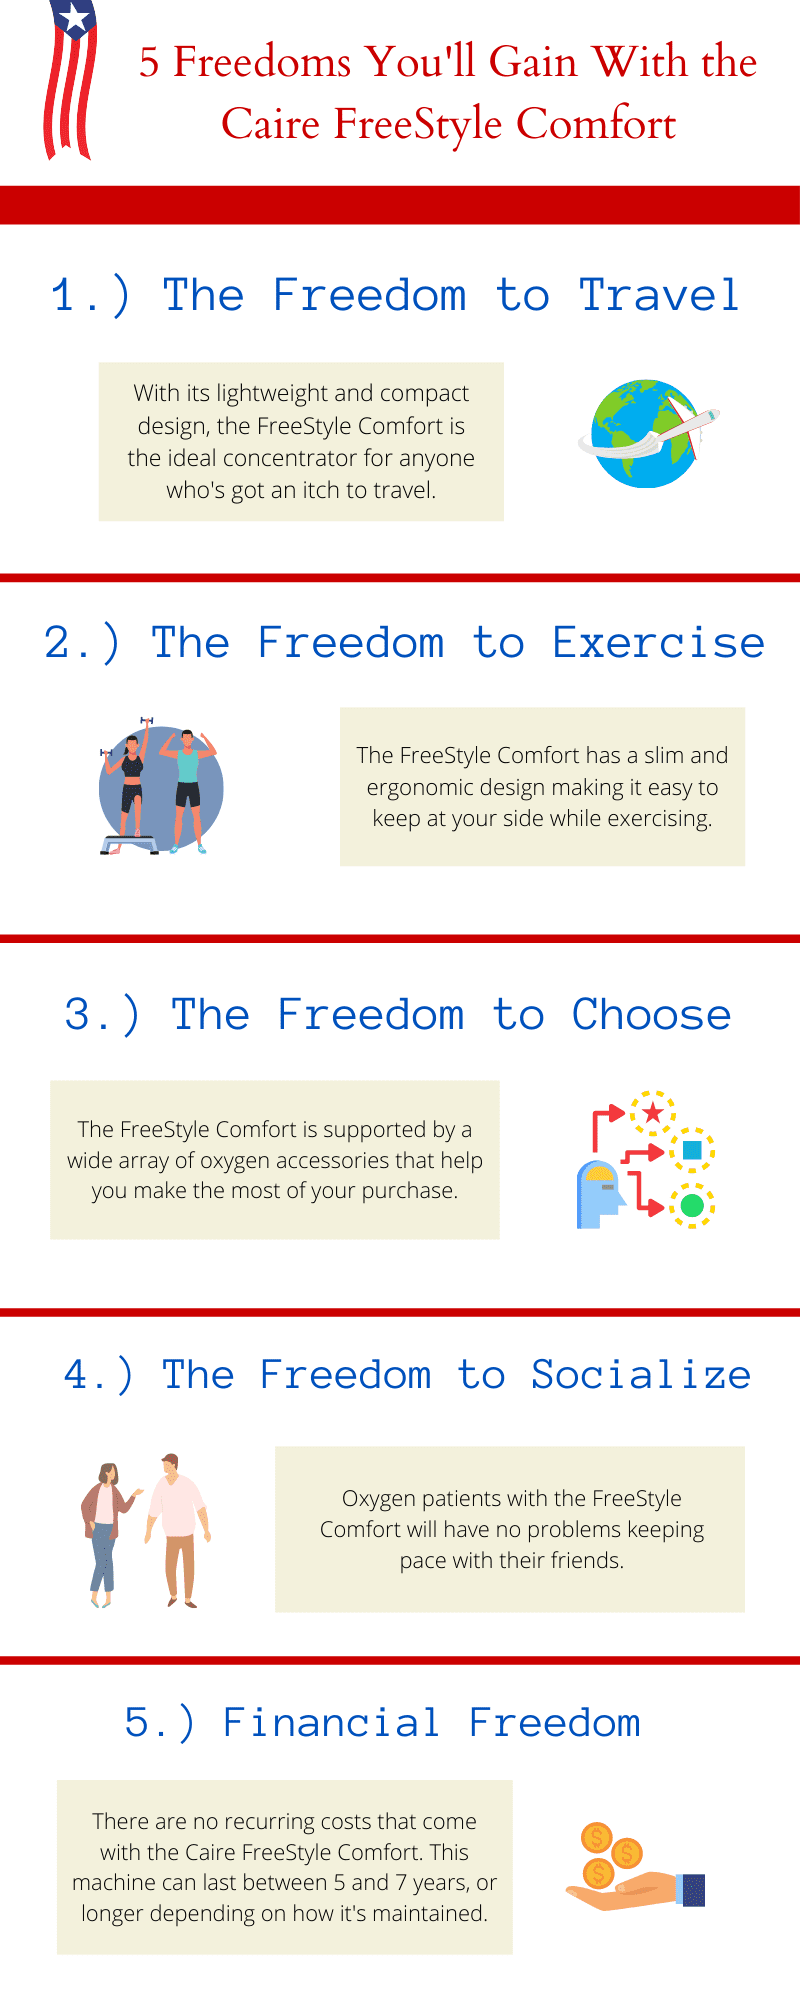 5 Freedoms You'll Gain With the FreeStyle Comfort